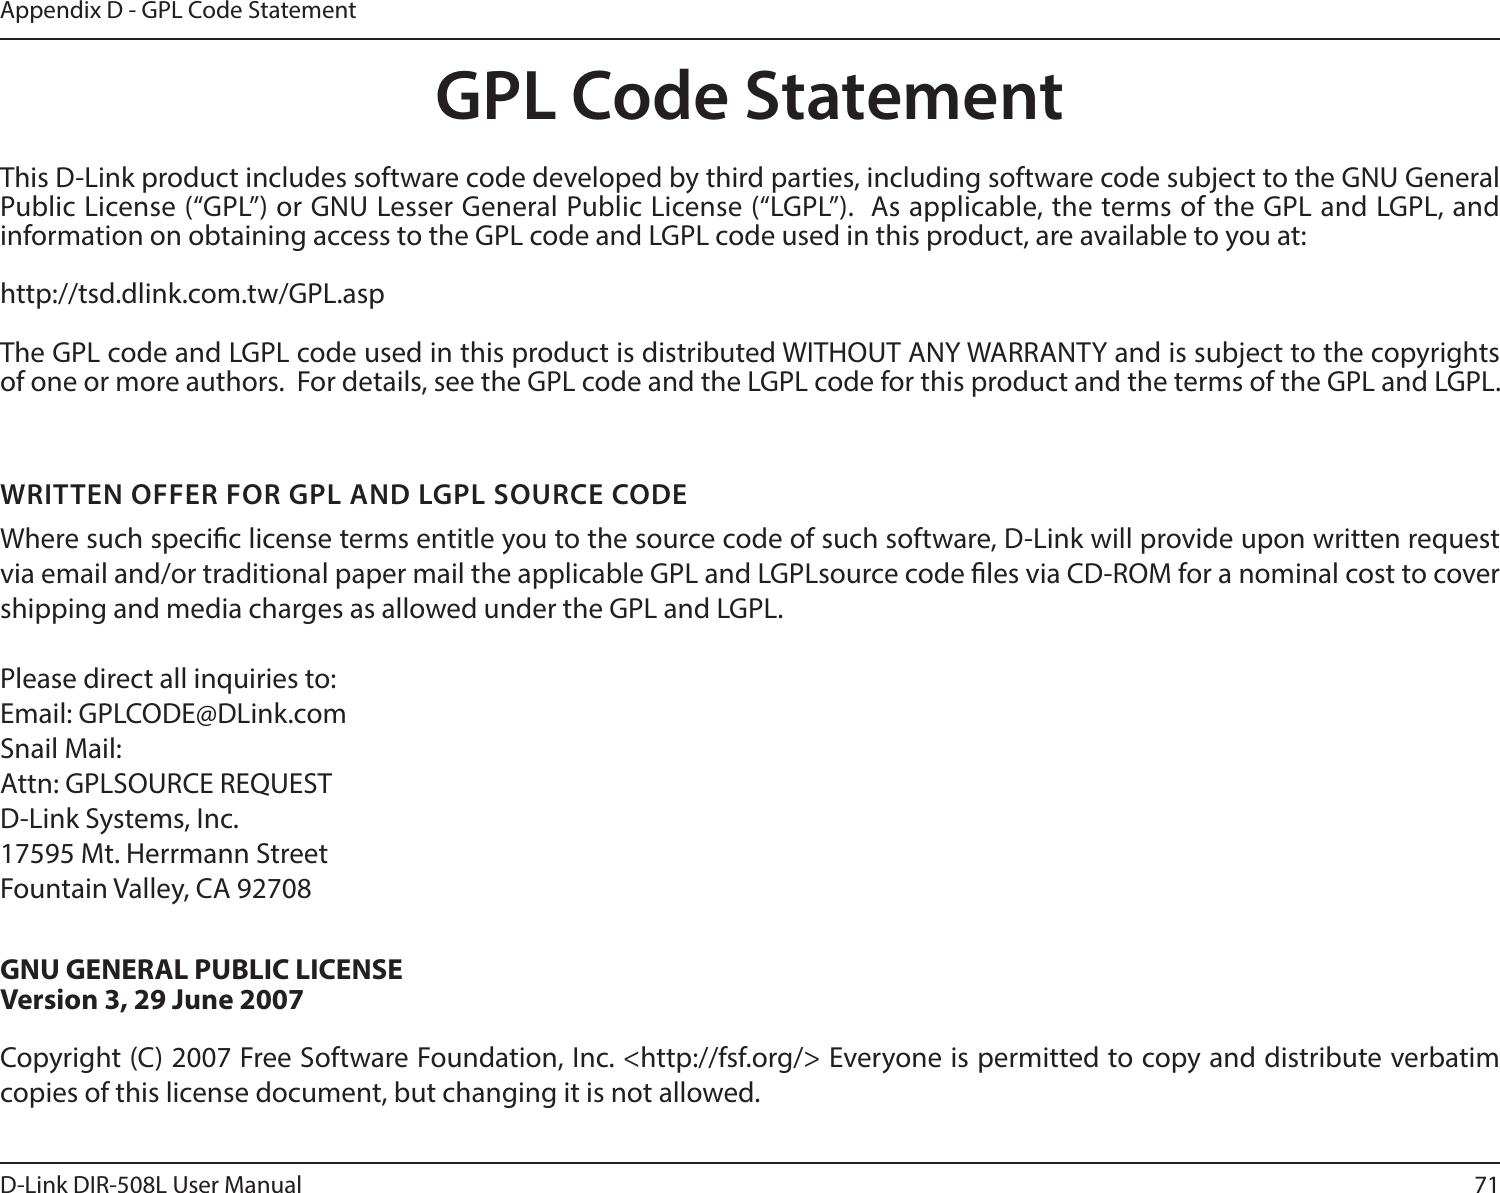 71D-Link DIR-508L User ManualAppendix D - GPL Code StatementGPL Code StatementThis D-Link product includes software code developed by third parties, including software code subject to the GNU General Public License (“GPL”) or GNU Lesser General Public License (“LGPL”).  As applicable, the terms of the GPL and LGPL, and information on obtaining access to the GPL code and LGPL code used in this product, are available to you at:http://tsd.dlink.com.tw/GPL.aspThe GPL code and LGPL code used in this product is distributed WITHOUT ANY WARRANTY and is subject to the copyrights of one or more authors.  For details, see the GPL code and the LGPL code for this product and the terms of the GPL and LGPL.WRITTEN OFFER FOR GPL AND LGPL SOURCE CODEWhere such specic license terms entitle you to the source code of such software, D-Link will provide upon written request via email and/or traditional paper mail the applicable GPL and LGPLsource code les via CD-ROM for a nominal cost to cover shipping and media charges as allowed under the GPL and LGPL.  Please direct all inquiries to:Email: GPLCODE@DLink.comSnail Mail:Attn: GPLSOURCE REQUESTD-Link Systems, Inc.17595 Mt. Herrmann StreetFountain Valley, CA 92708GNU GENERAL PUBLIC LICENSEVersion 3, 29 June 2007Copyright (C) 2007 Free Software Foundation, Inc. &lt;http://fsf.org/&gt; Everyone is permitted to copy and distribute verbatim copies of this license document, but changing it is not allowed.